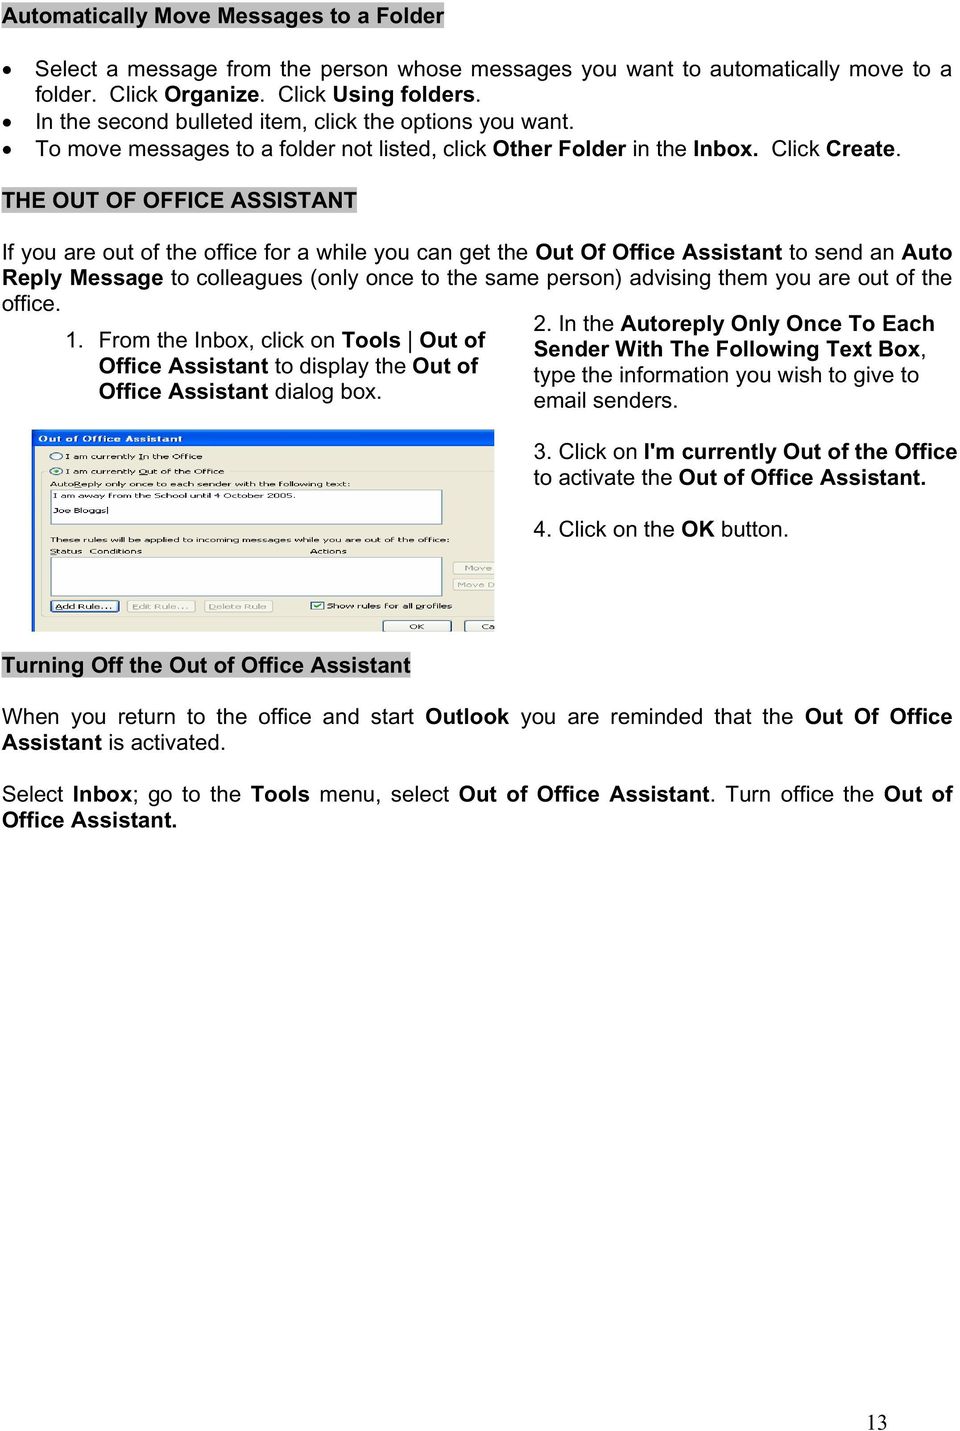 THE OUT OF OFFICE ASSISTANT If you are out of the office for a while you can get the Out Of Office Assistant to send an Auto Reply Message to colleagues (only once to the same person) advising them